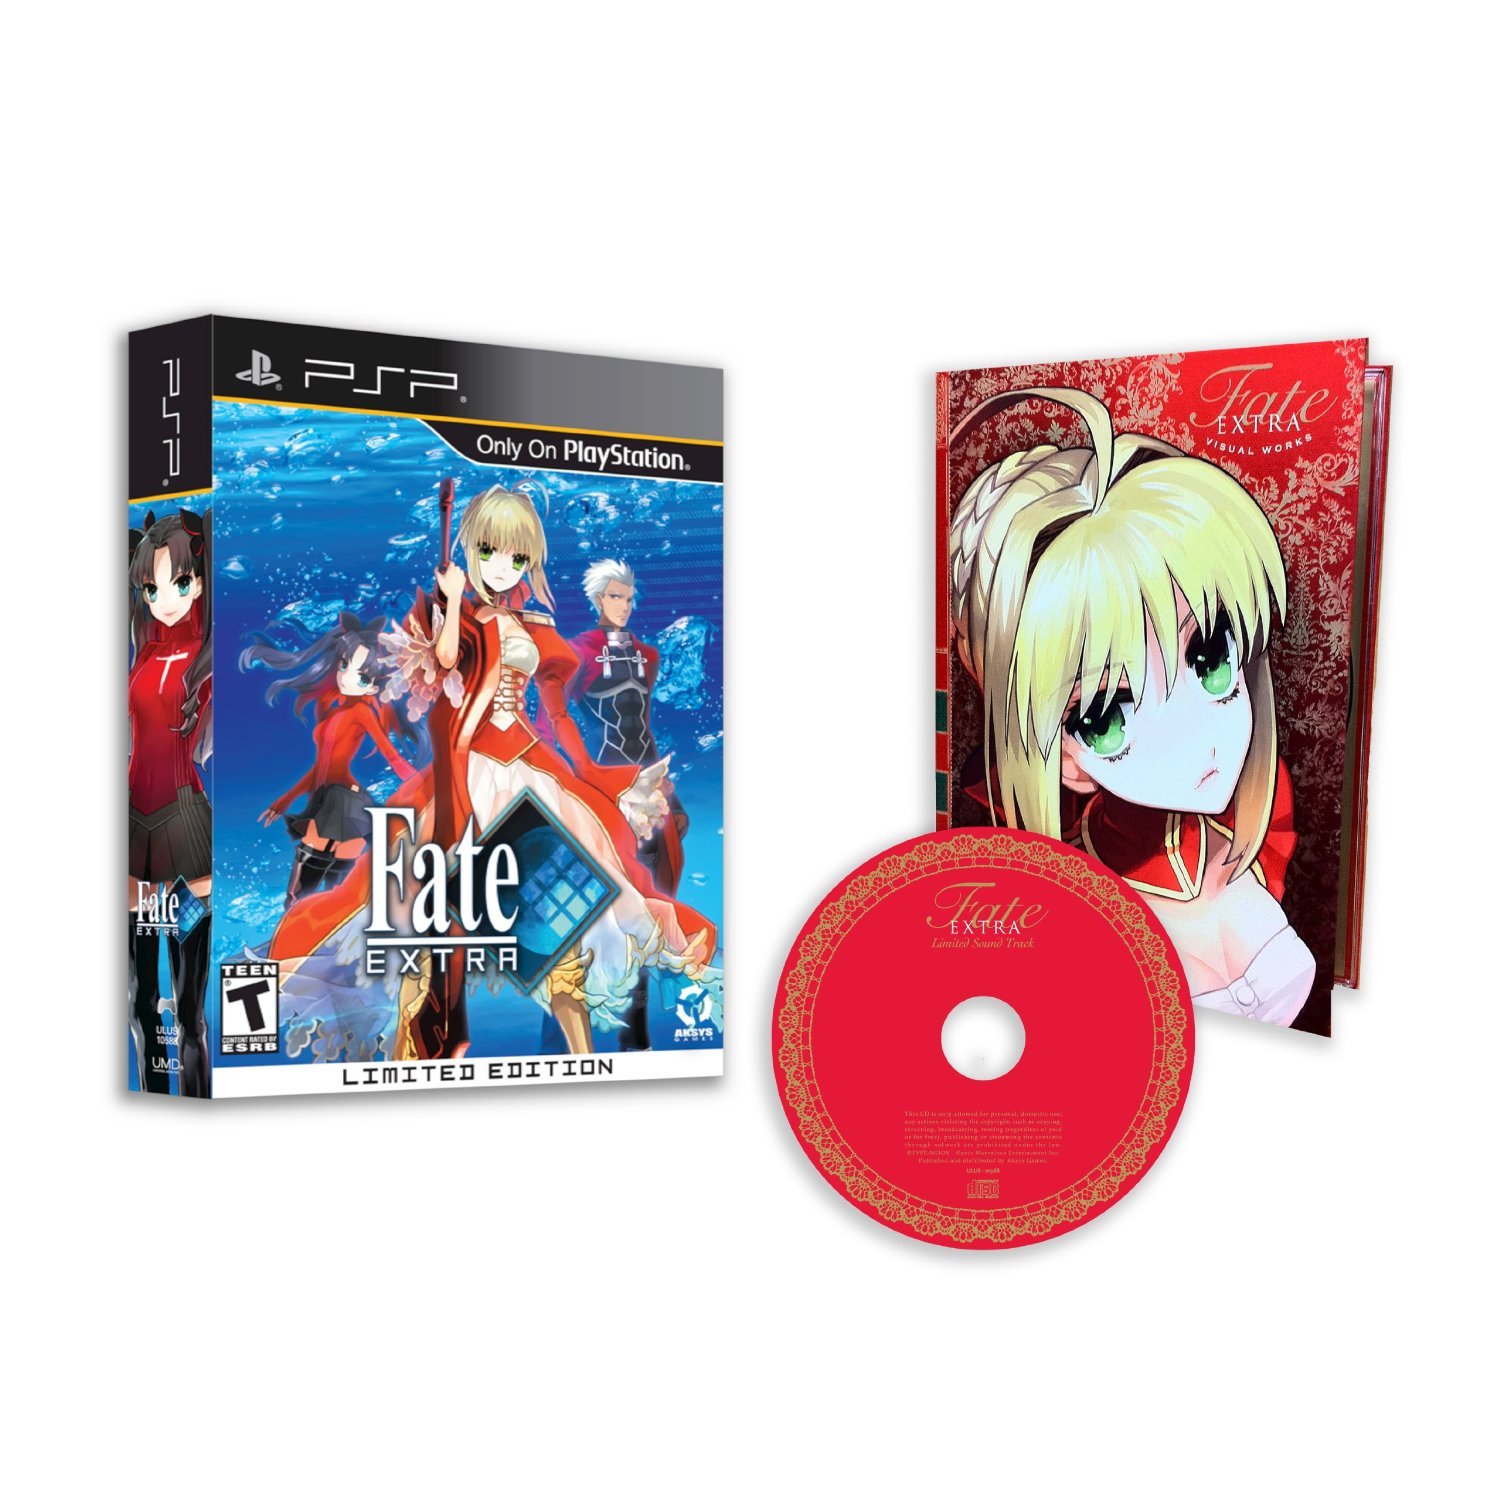 Image of Fate/Extra Limited Edition